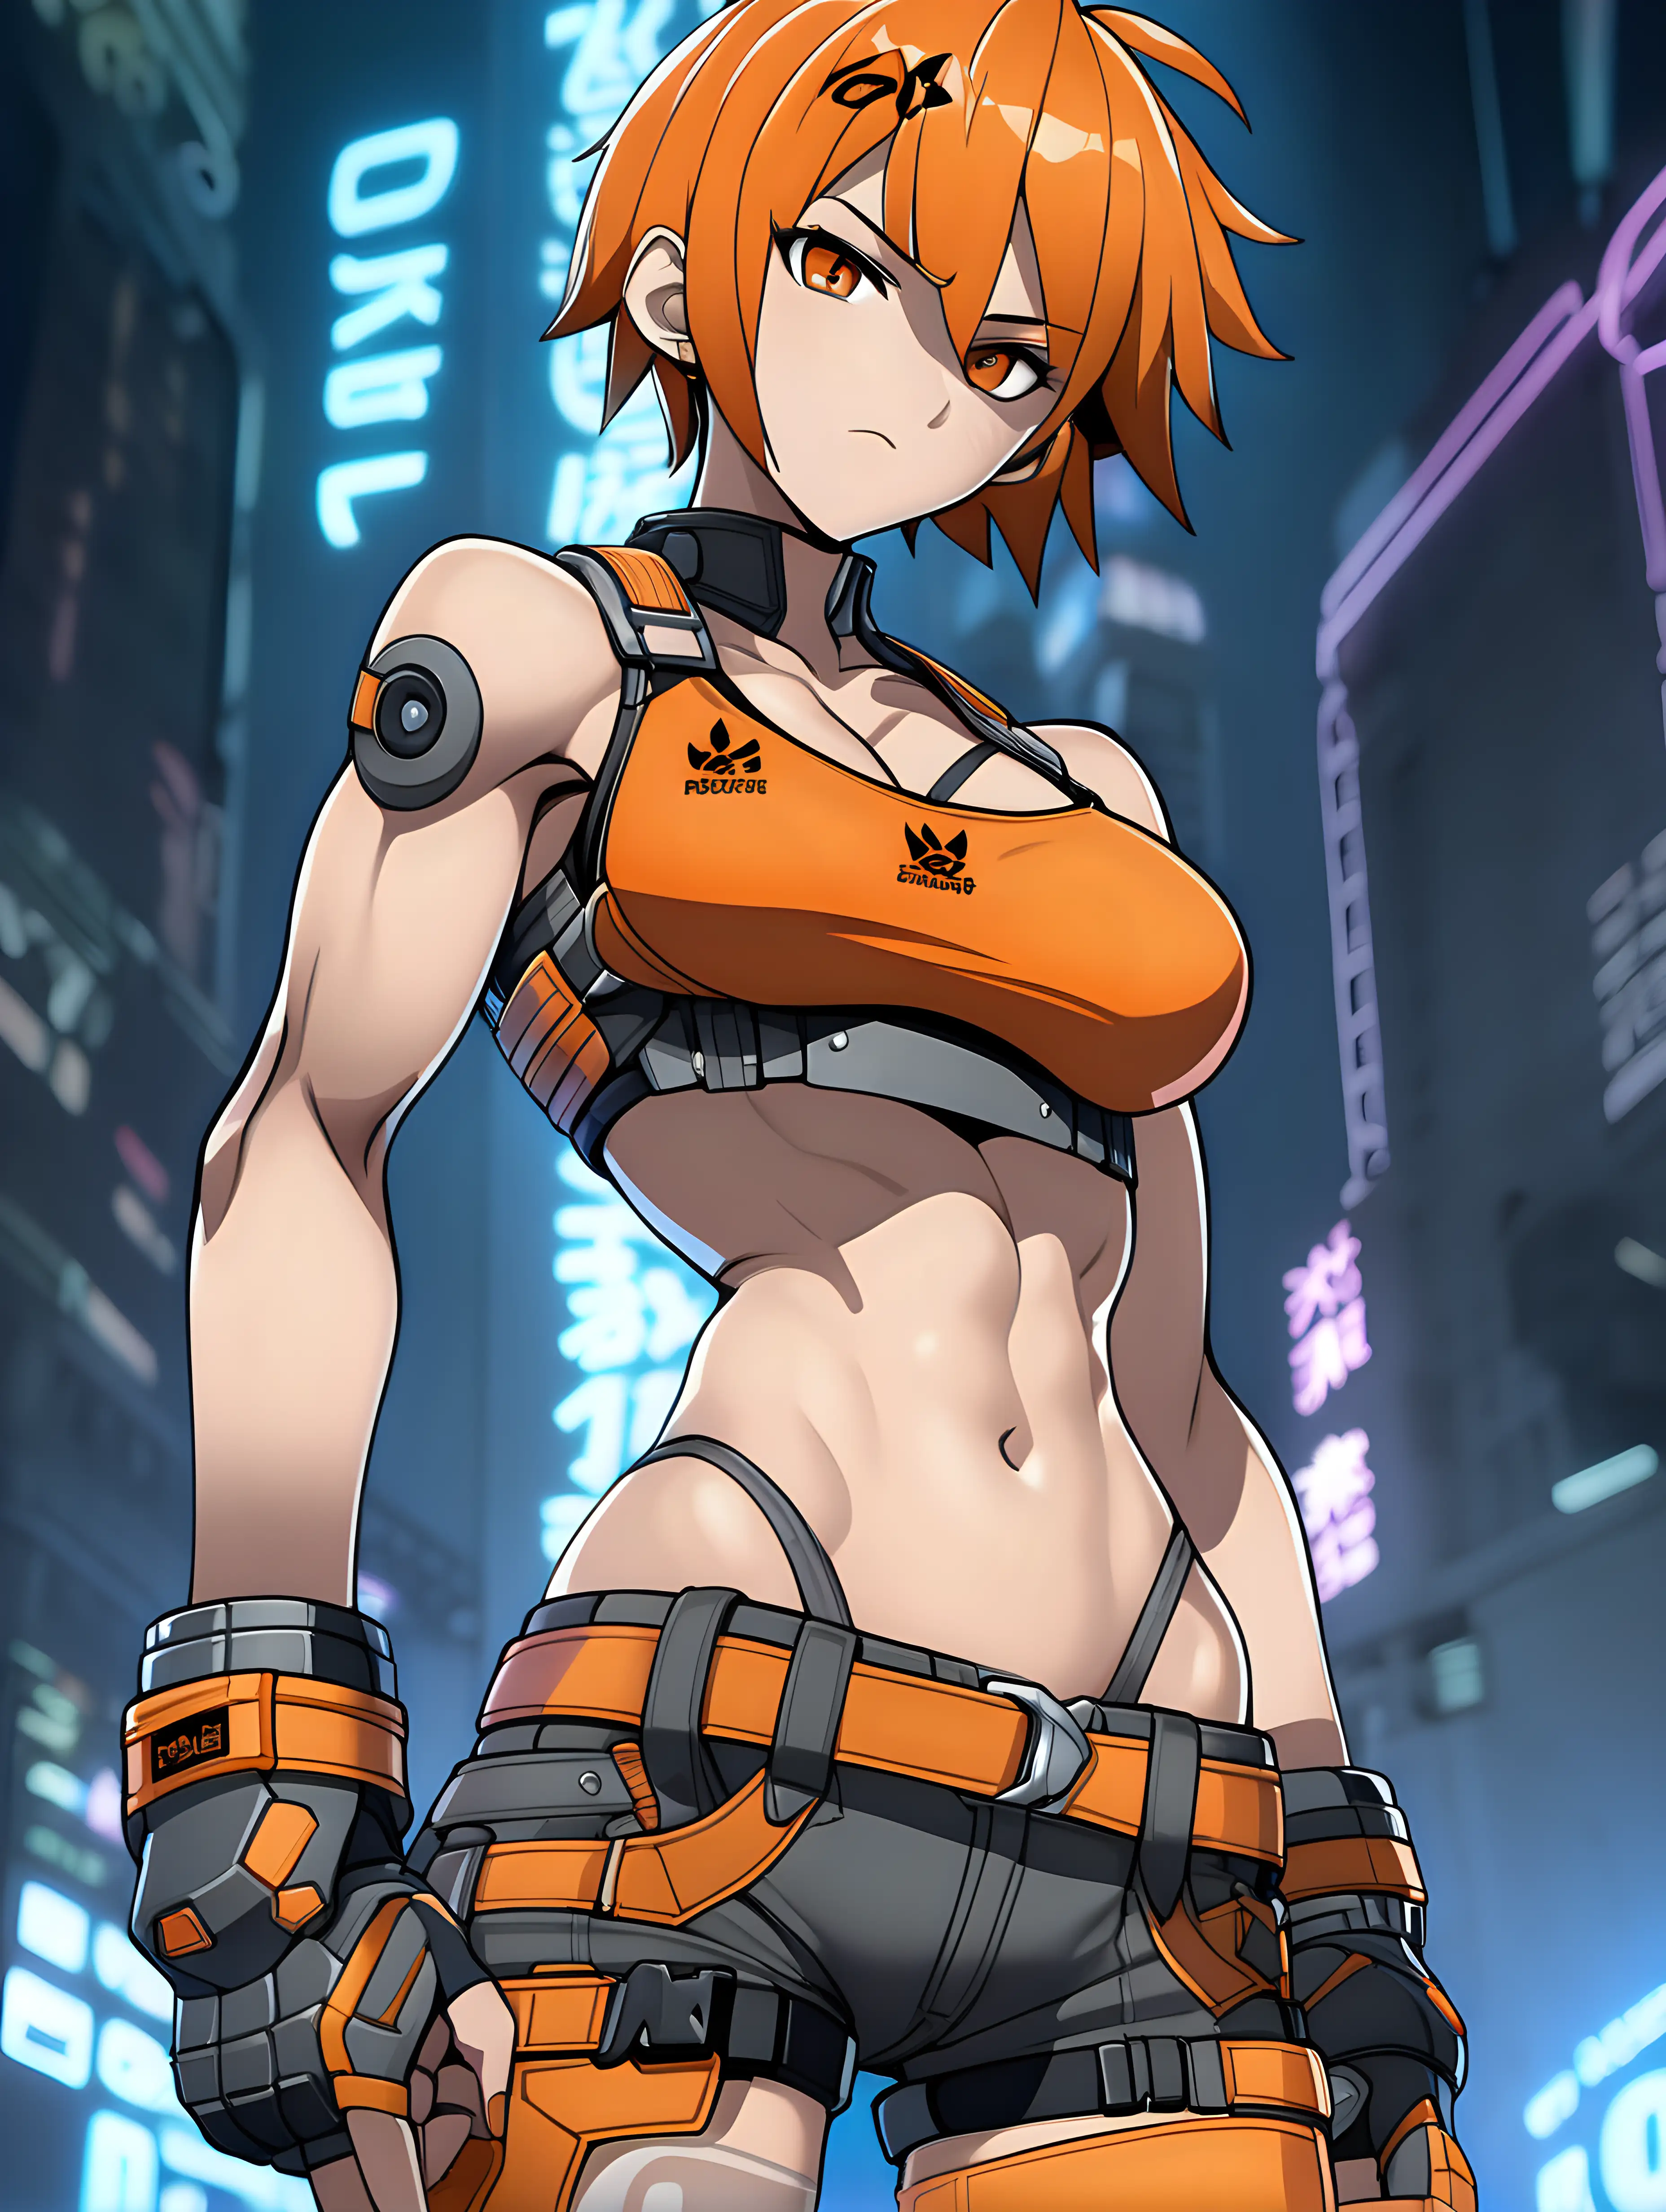 Anime Cyberpunk Tomgirl with Orange Armor and Mischievous Grin